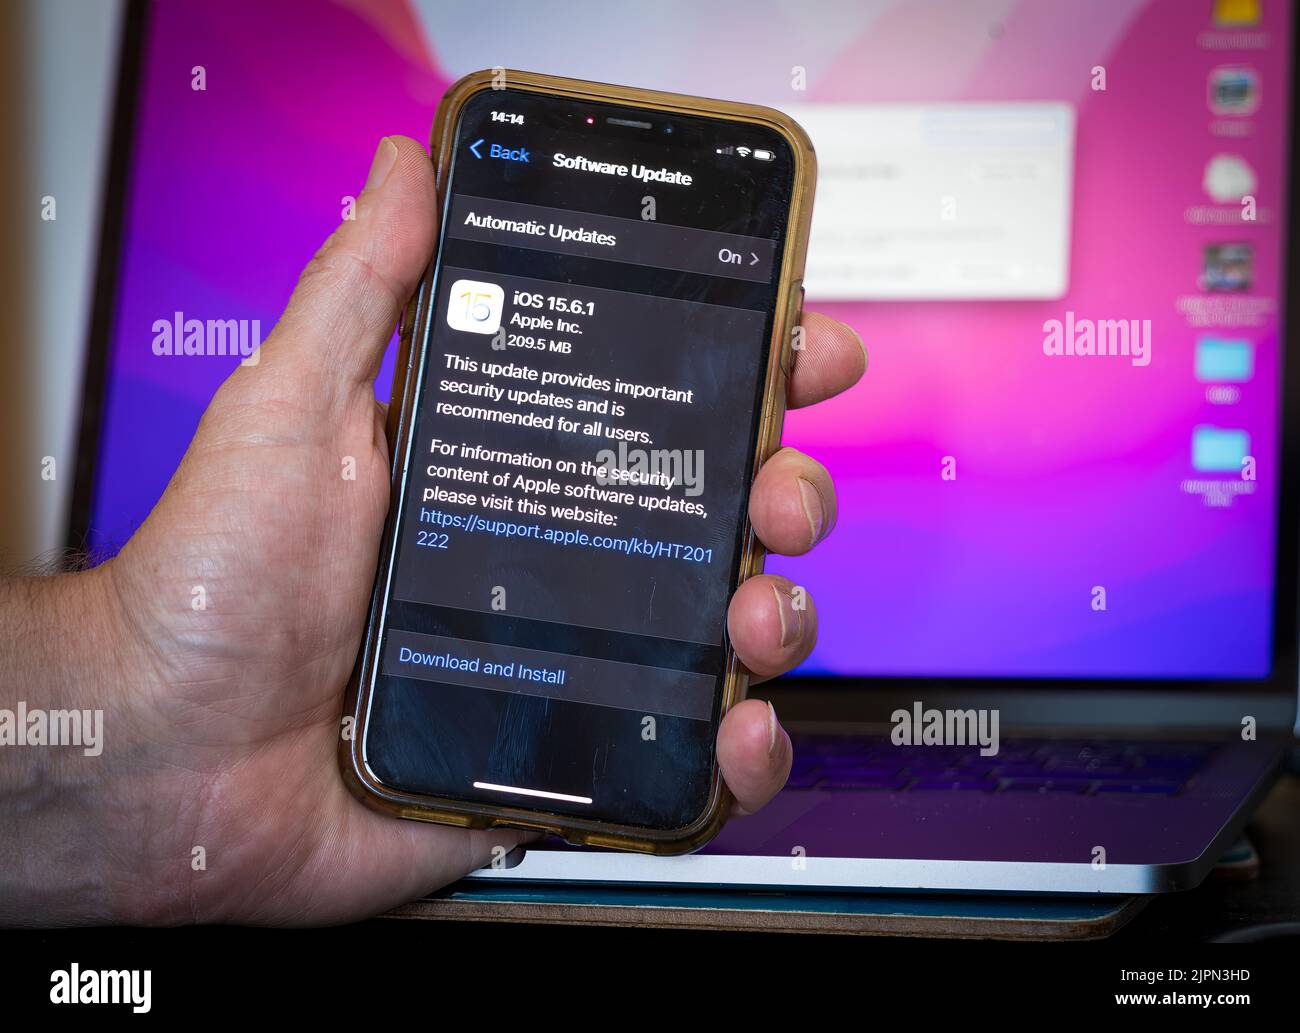 Billingshurst, West Sussex, UK. 19th Aug, 2022. Apple has released updates to fix security flaws on iPhones, iPads and Mac devices after hackers 'actively exploited' security vulnerabilities and flaws. Credit: Andy Soloman/Alamy Live News Stock Photo